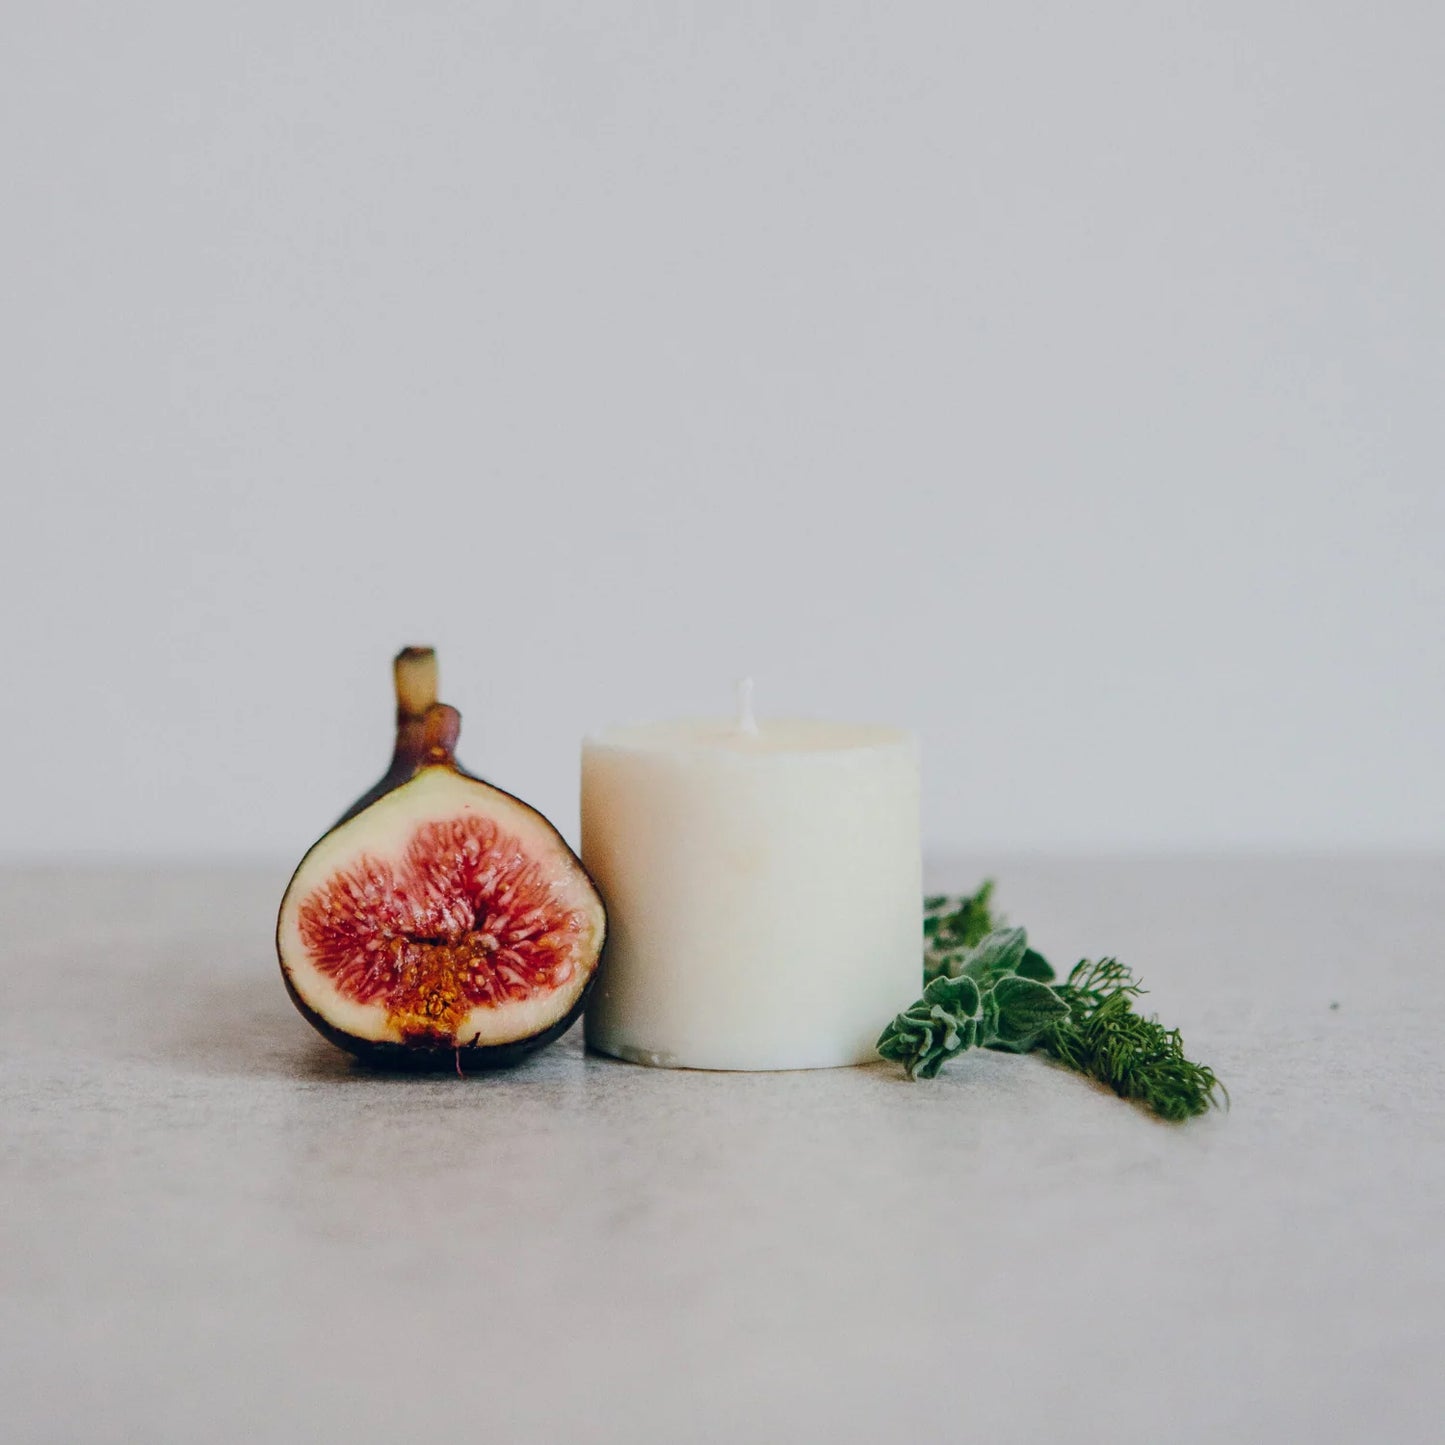 Petite Blush Pott with Fig Candle